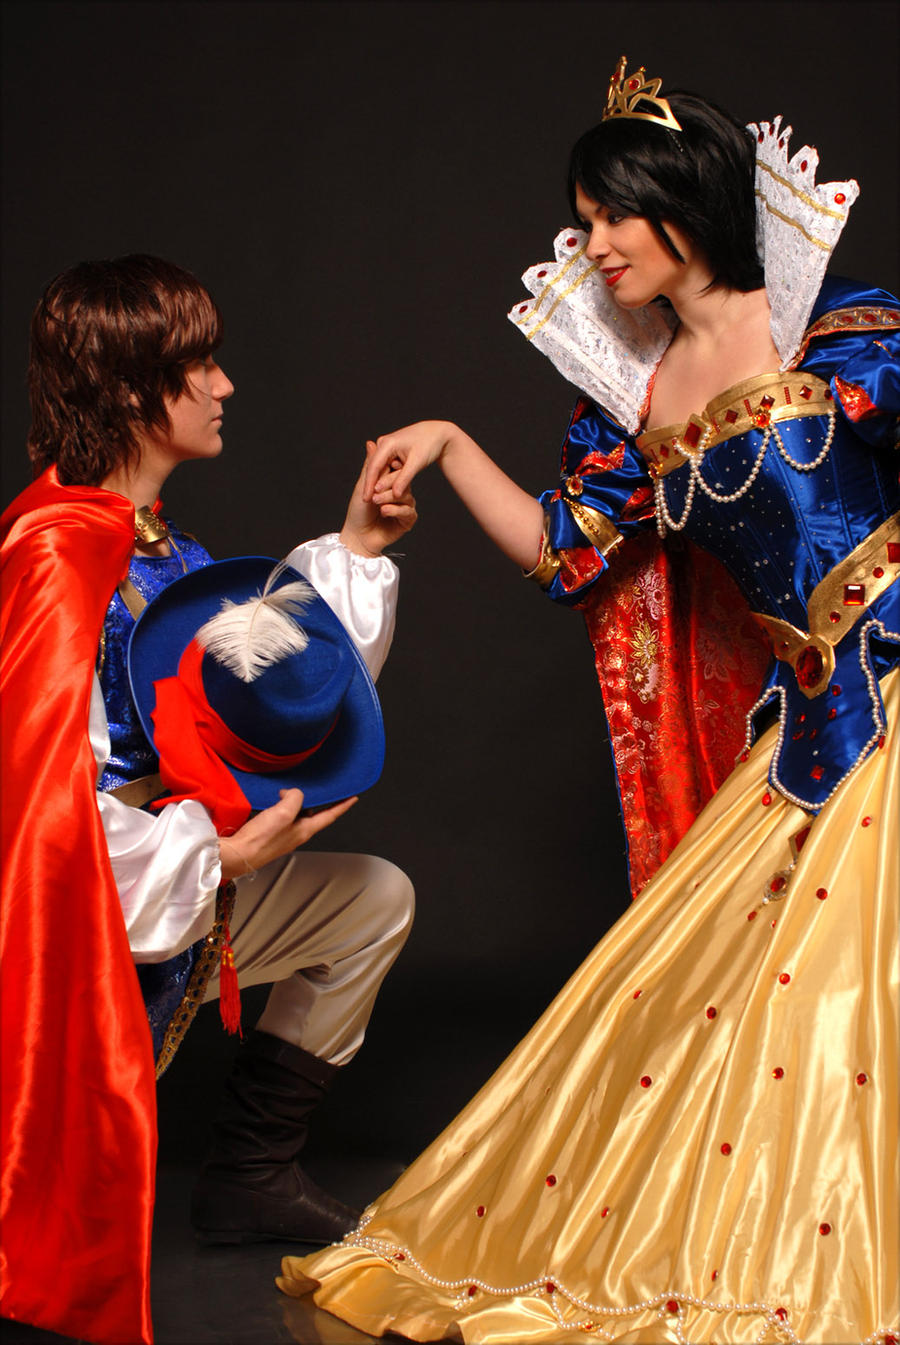 Snow white and the prince